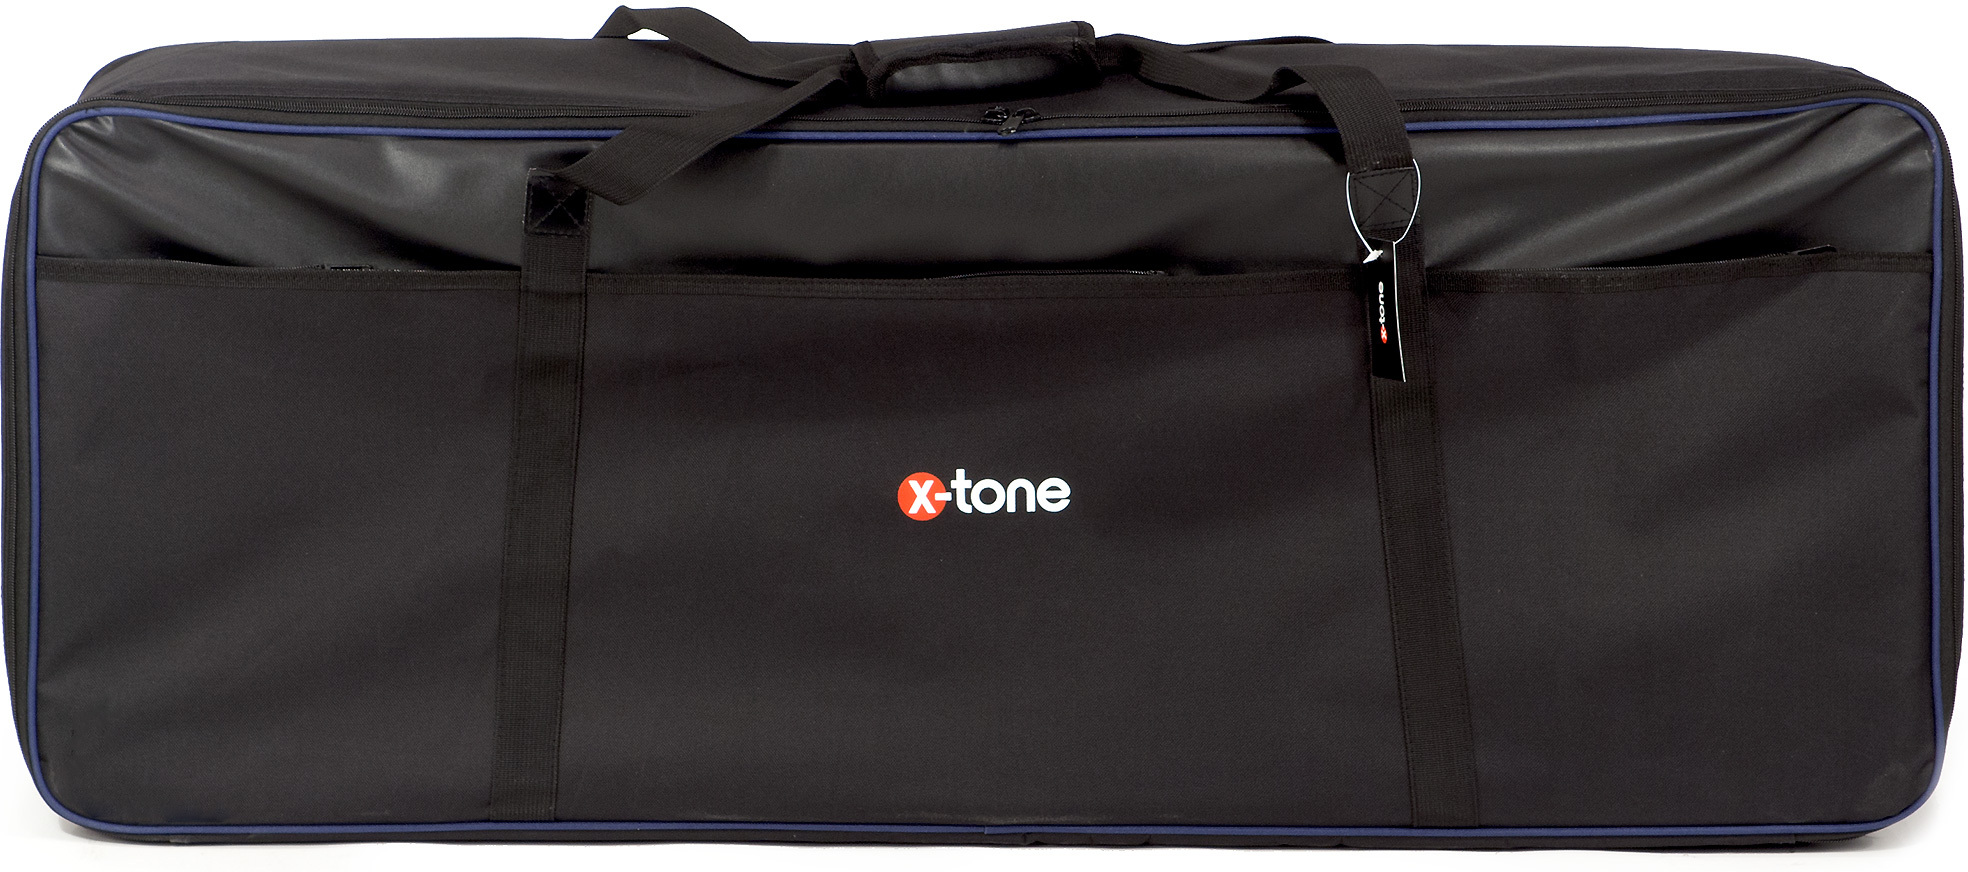 X-tone 2105 Pour Clavier 88 Notes En 25mm Black - Gigbag for Keyboard - Main picture